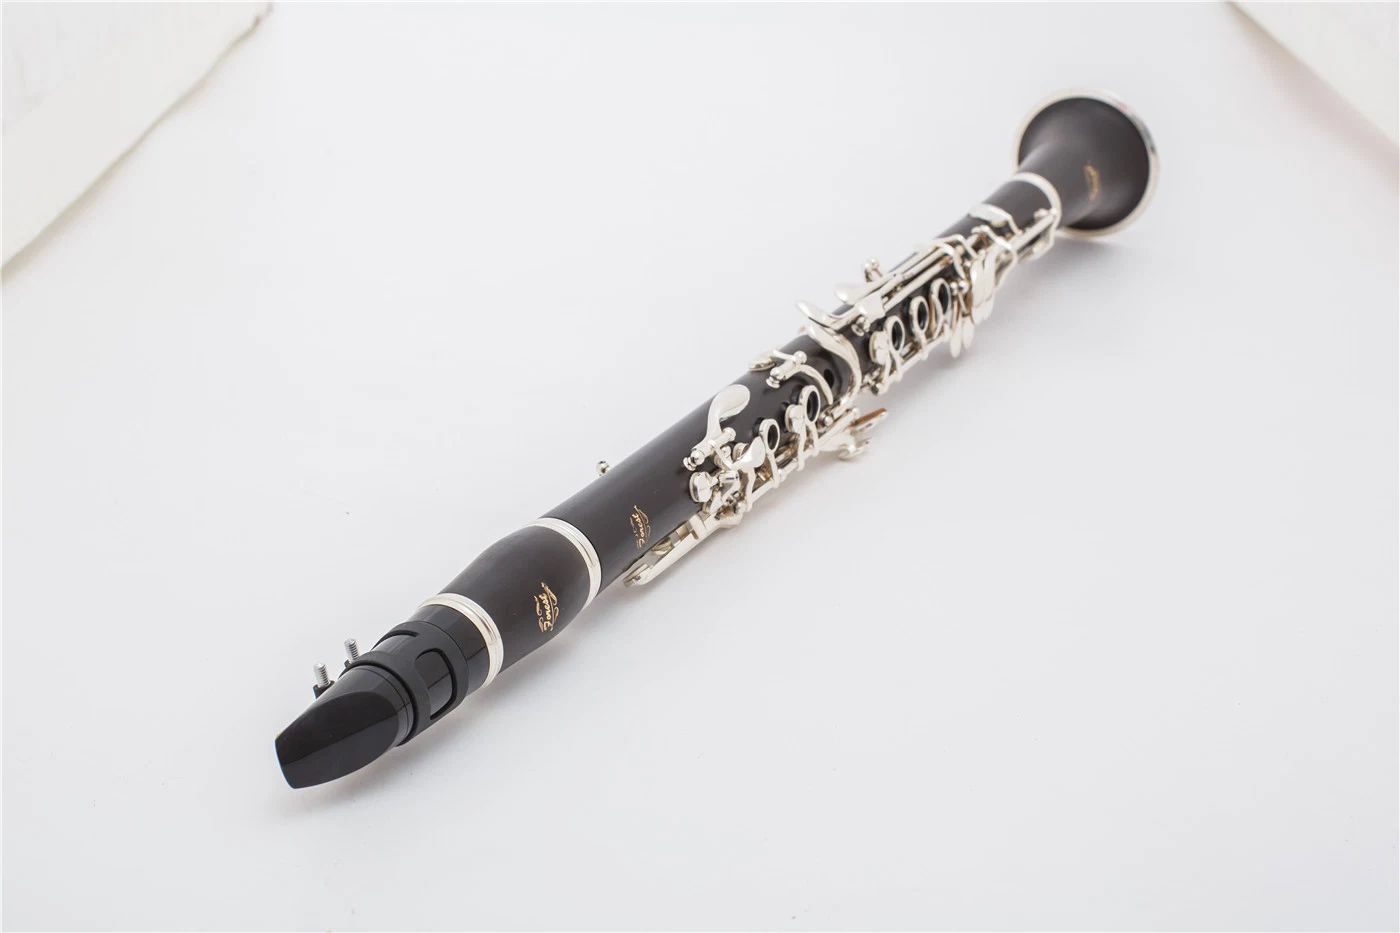 Clarinet for Sale, Wholesale Musical Instrument, Made in China